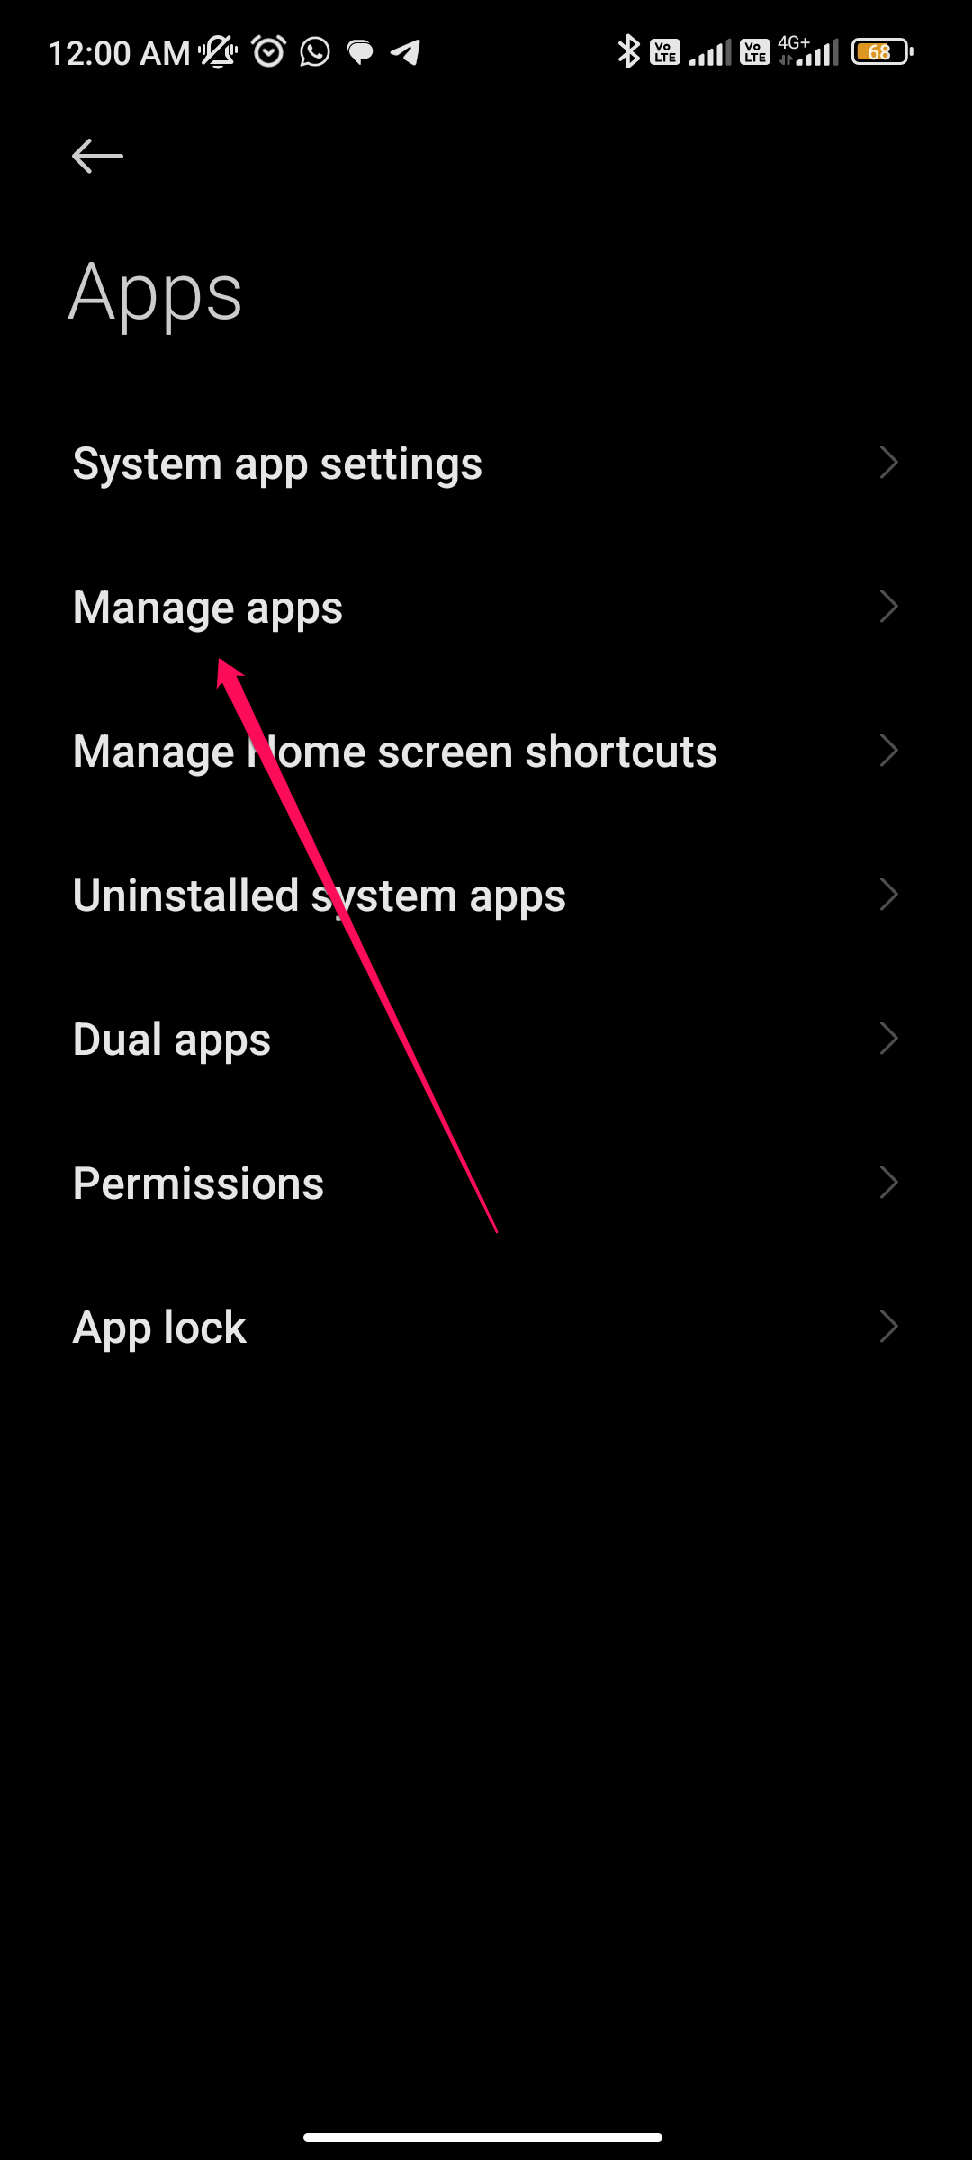 Clear Cache on Android And iOS